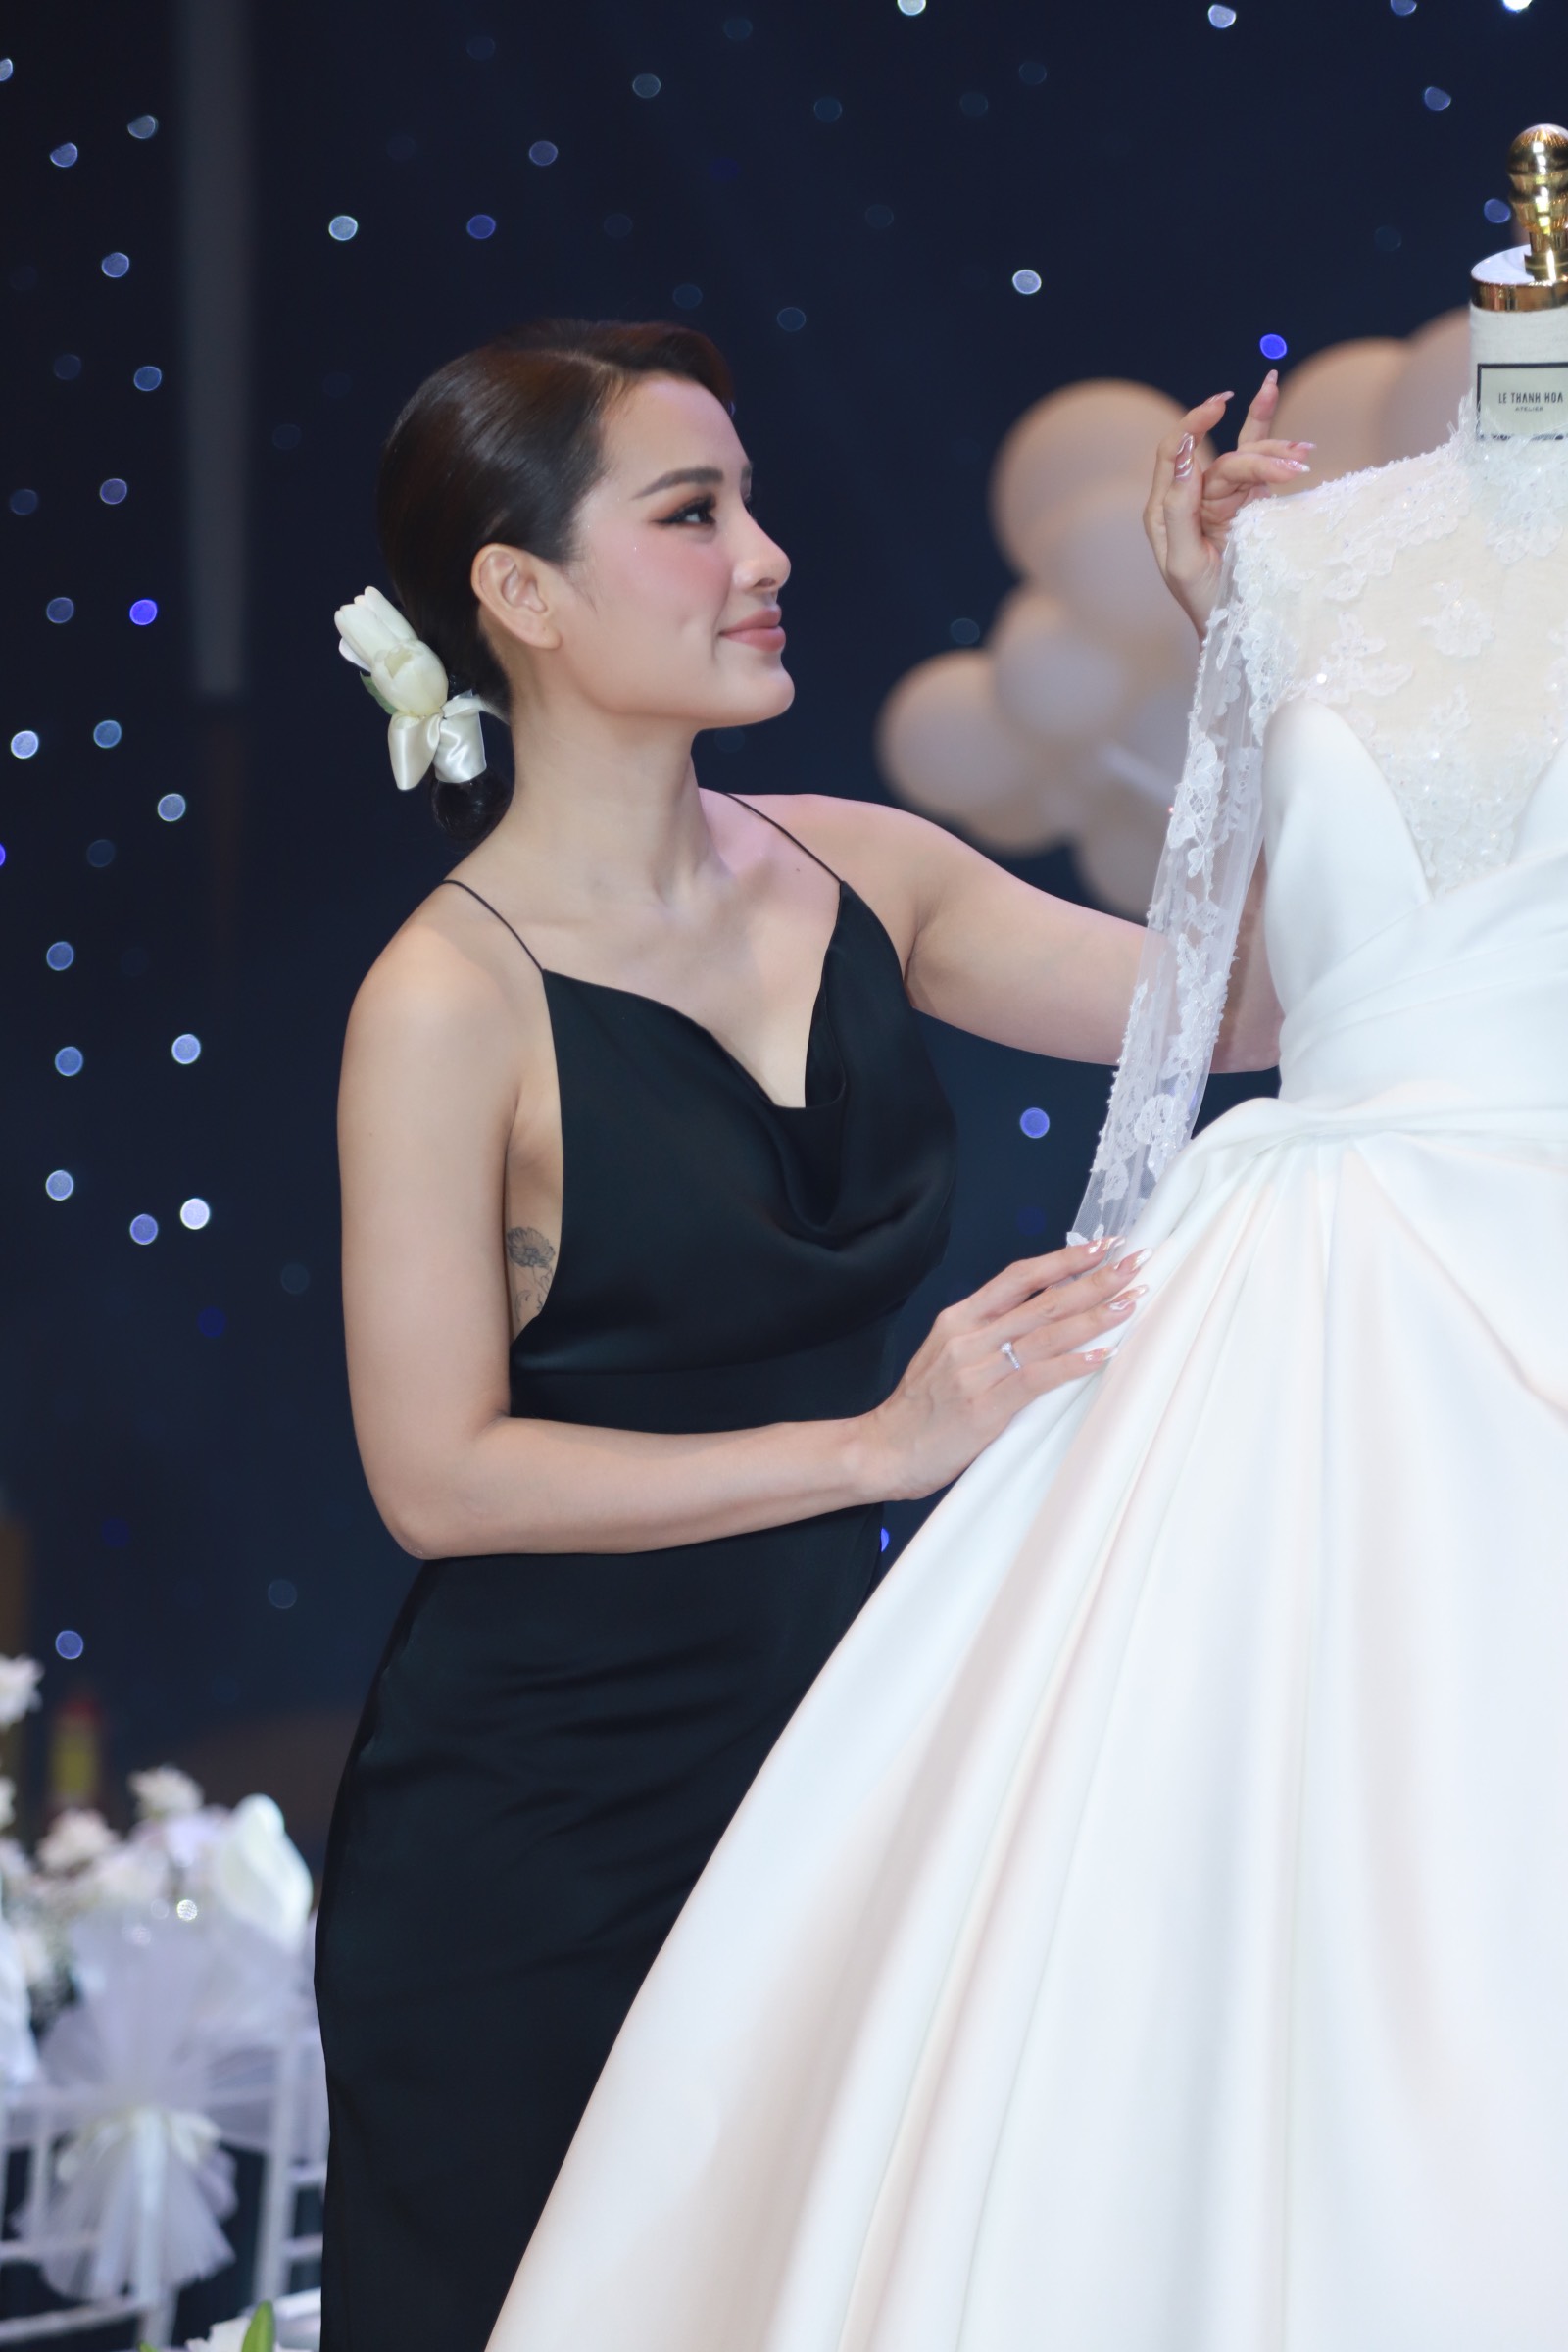 See all 3 wedding dresses of Phuong Trinh Jolie on the big day, the most shocking is the bold first round show - Photo 5.